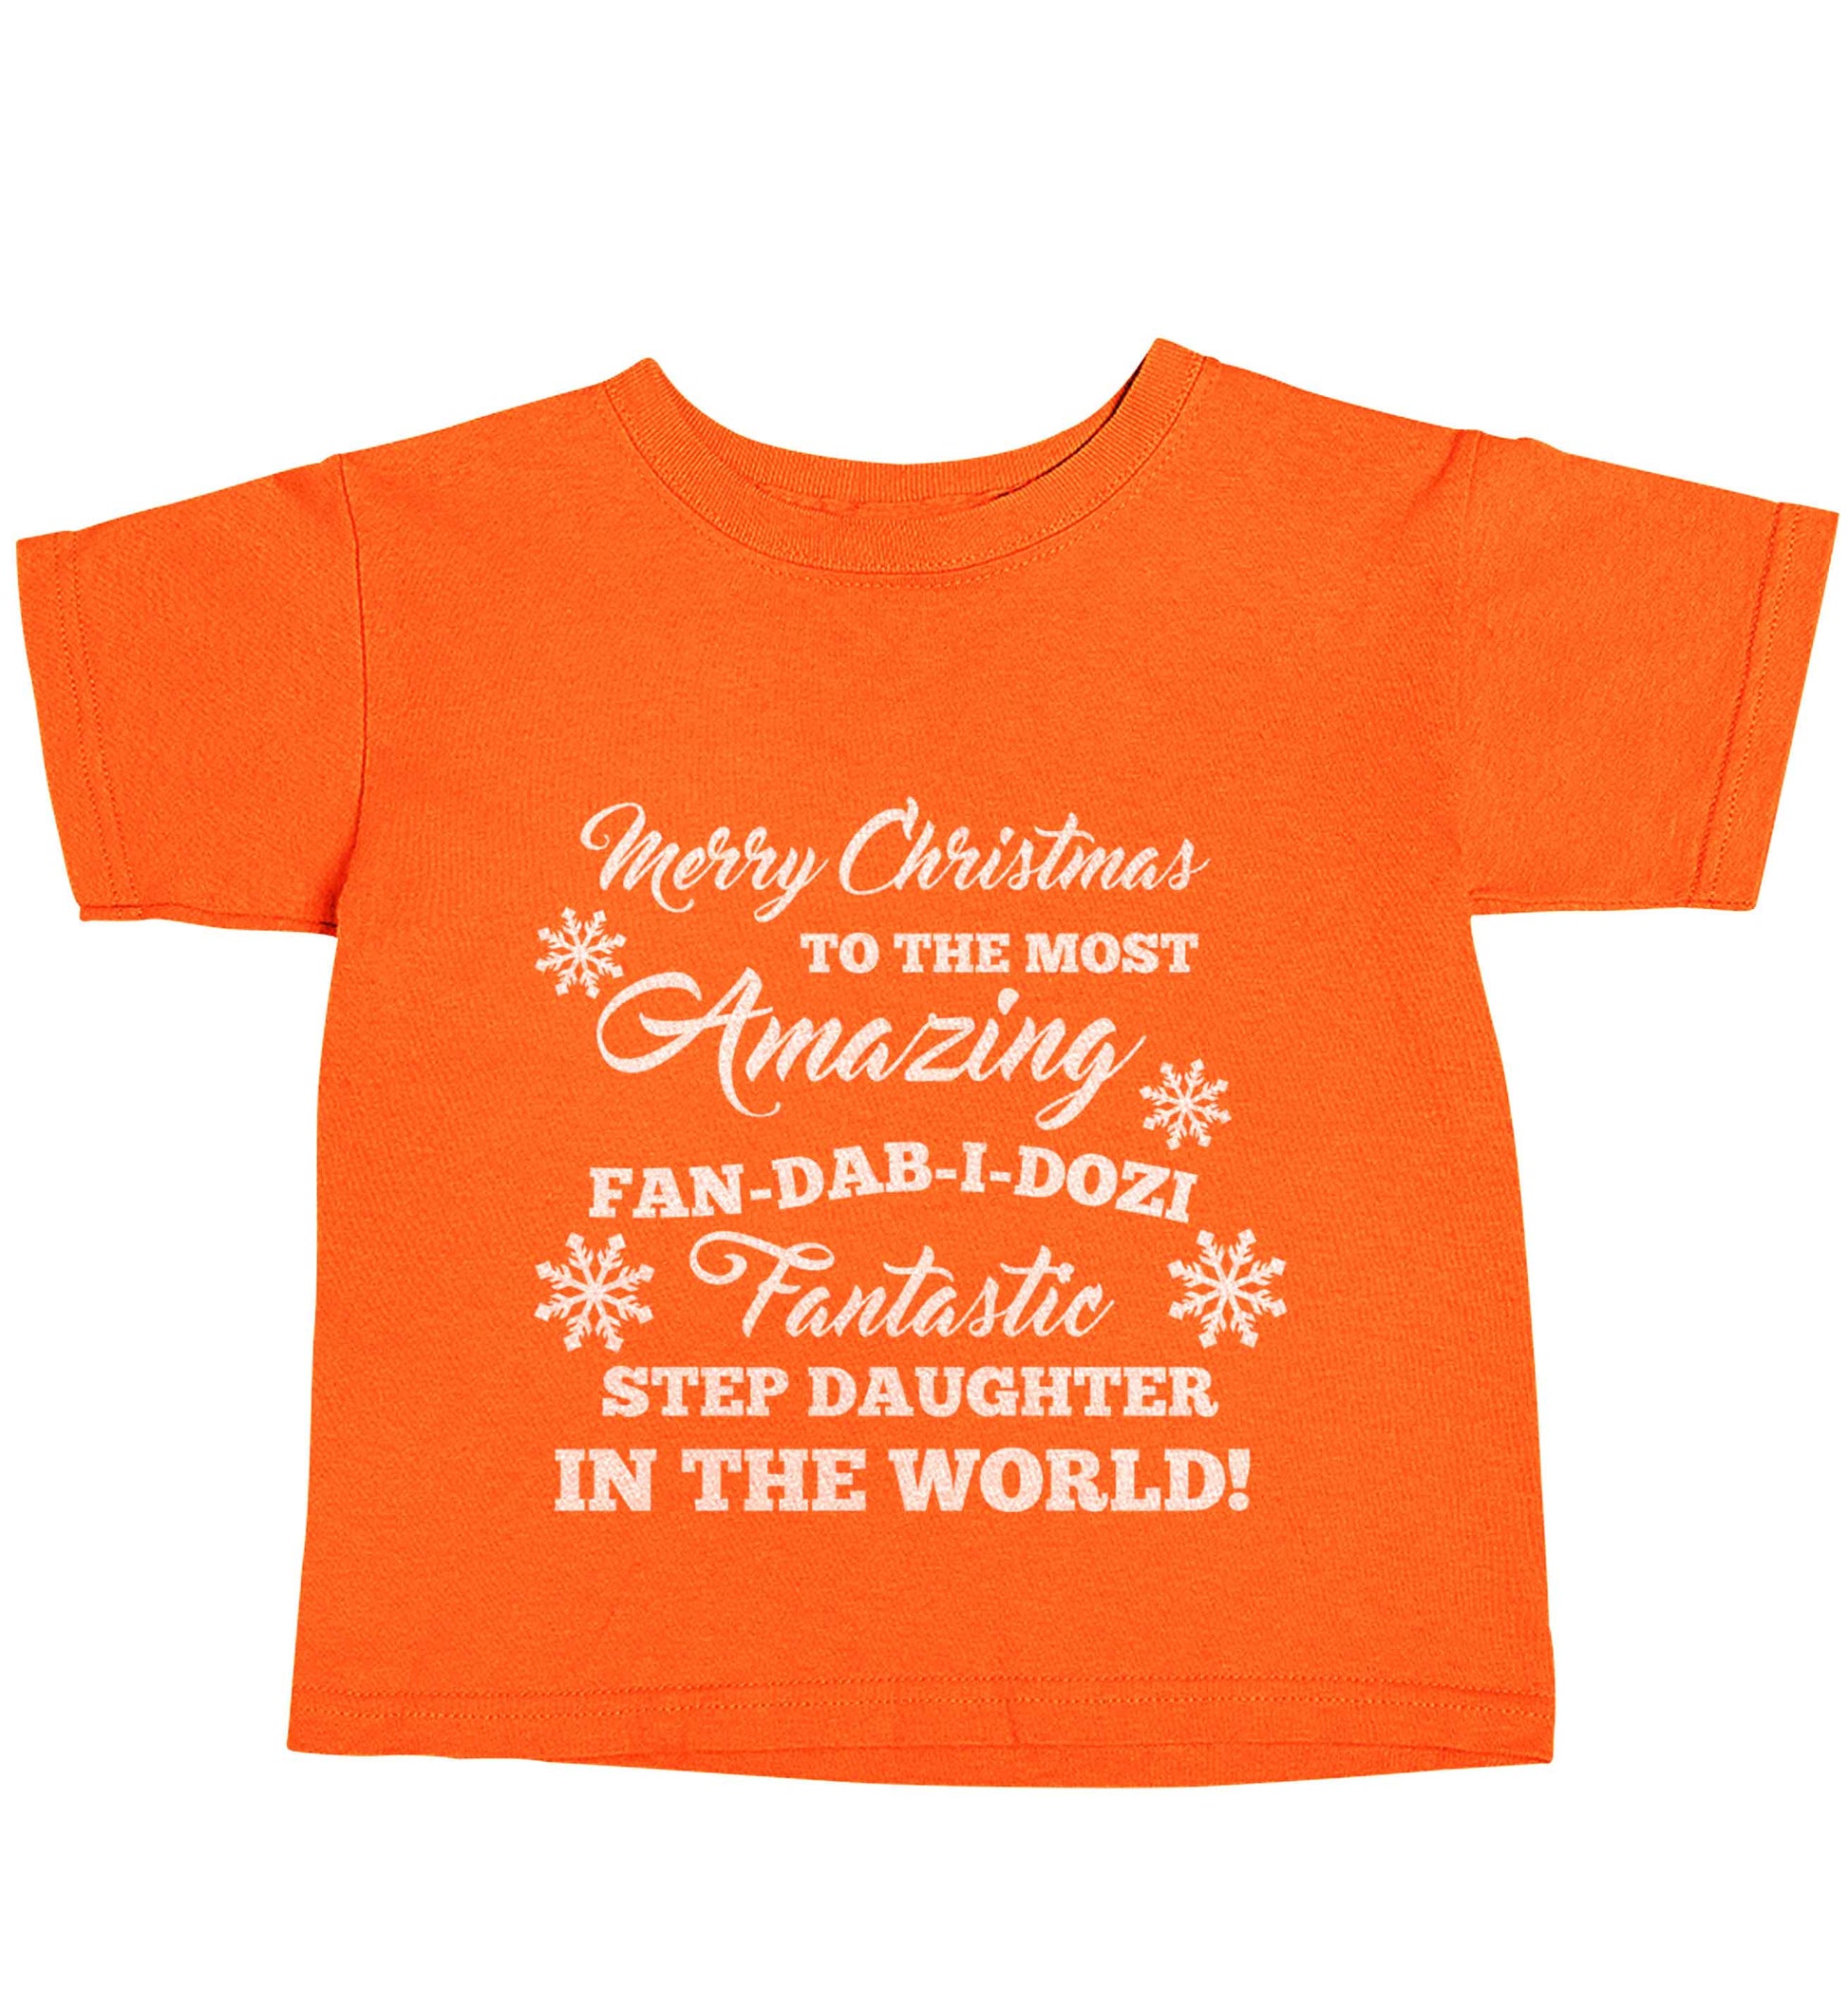 Merry Christmas to the most amazing fan-dab-i-dozi fantasic Step Daughter in the world orange baby toddler Tshirt 2 Years